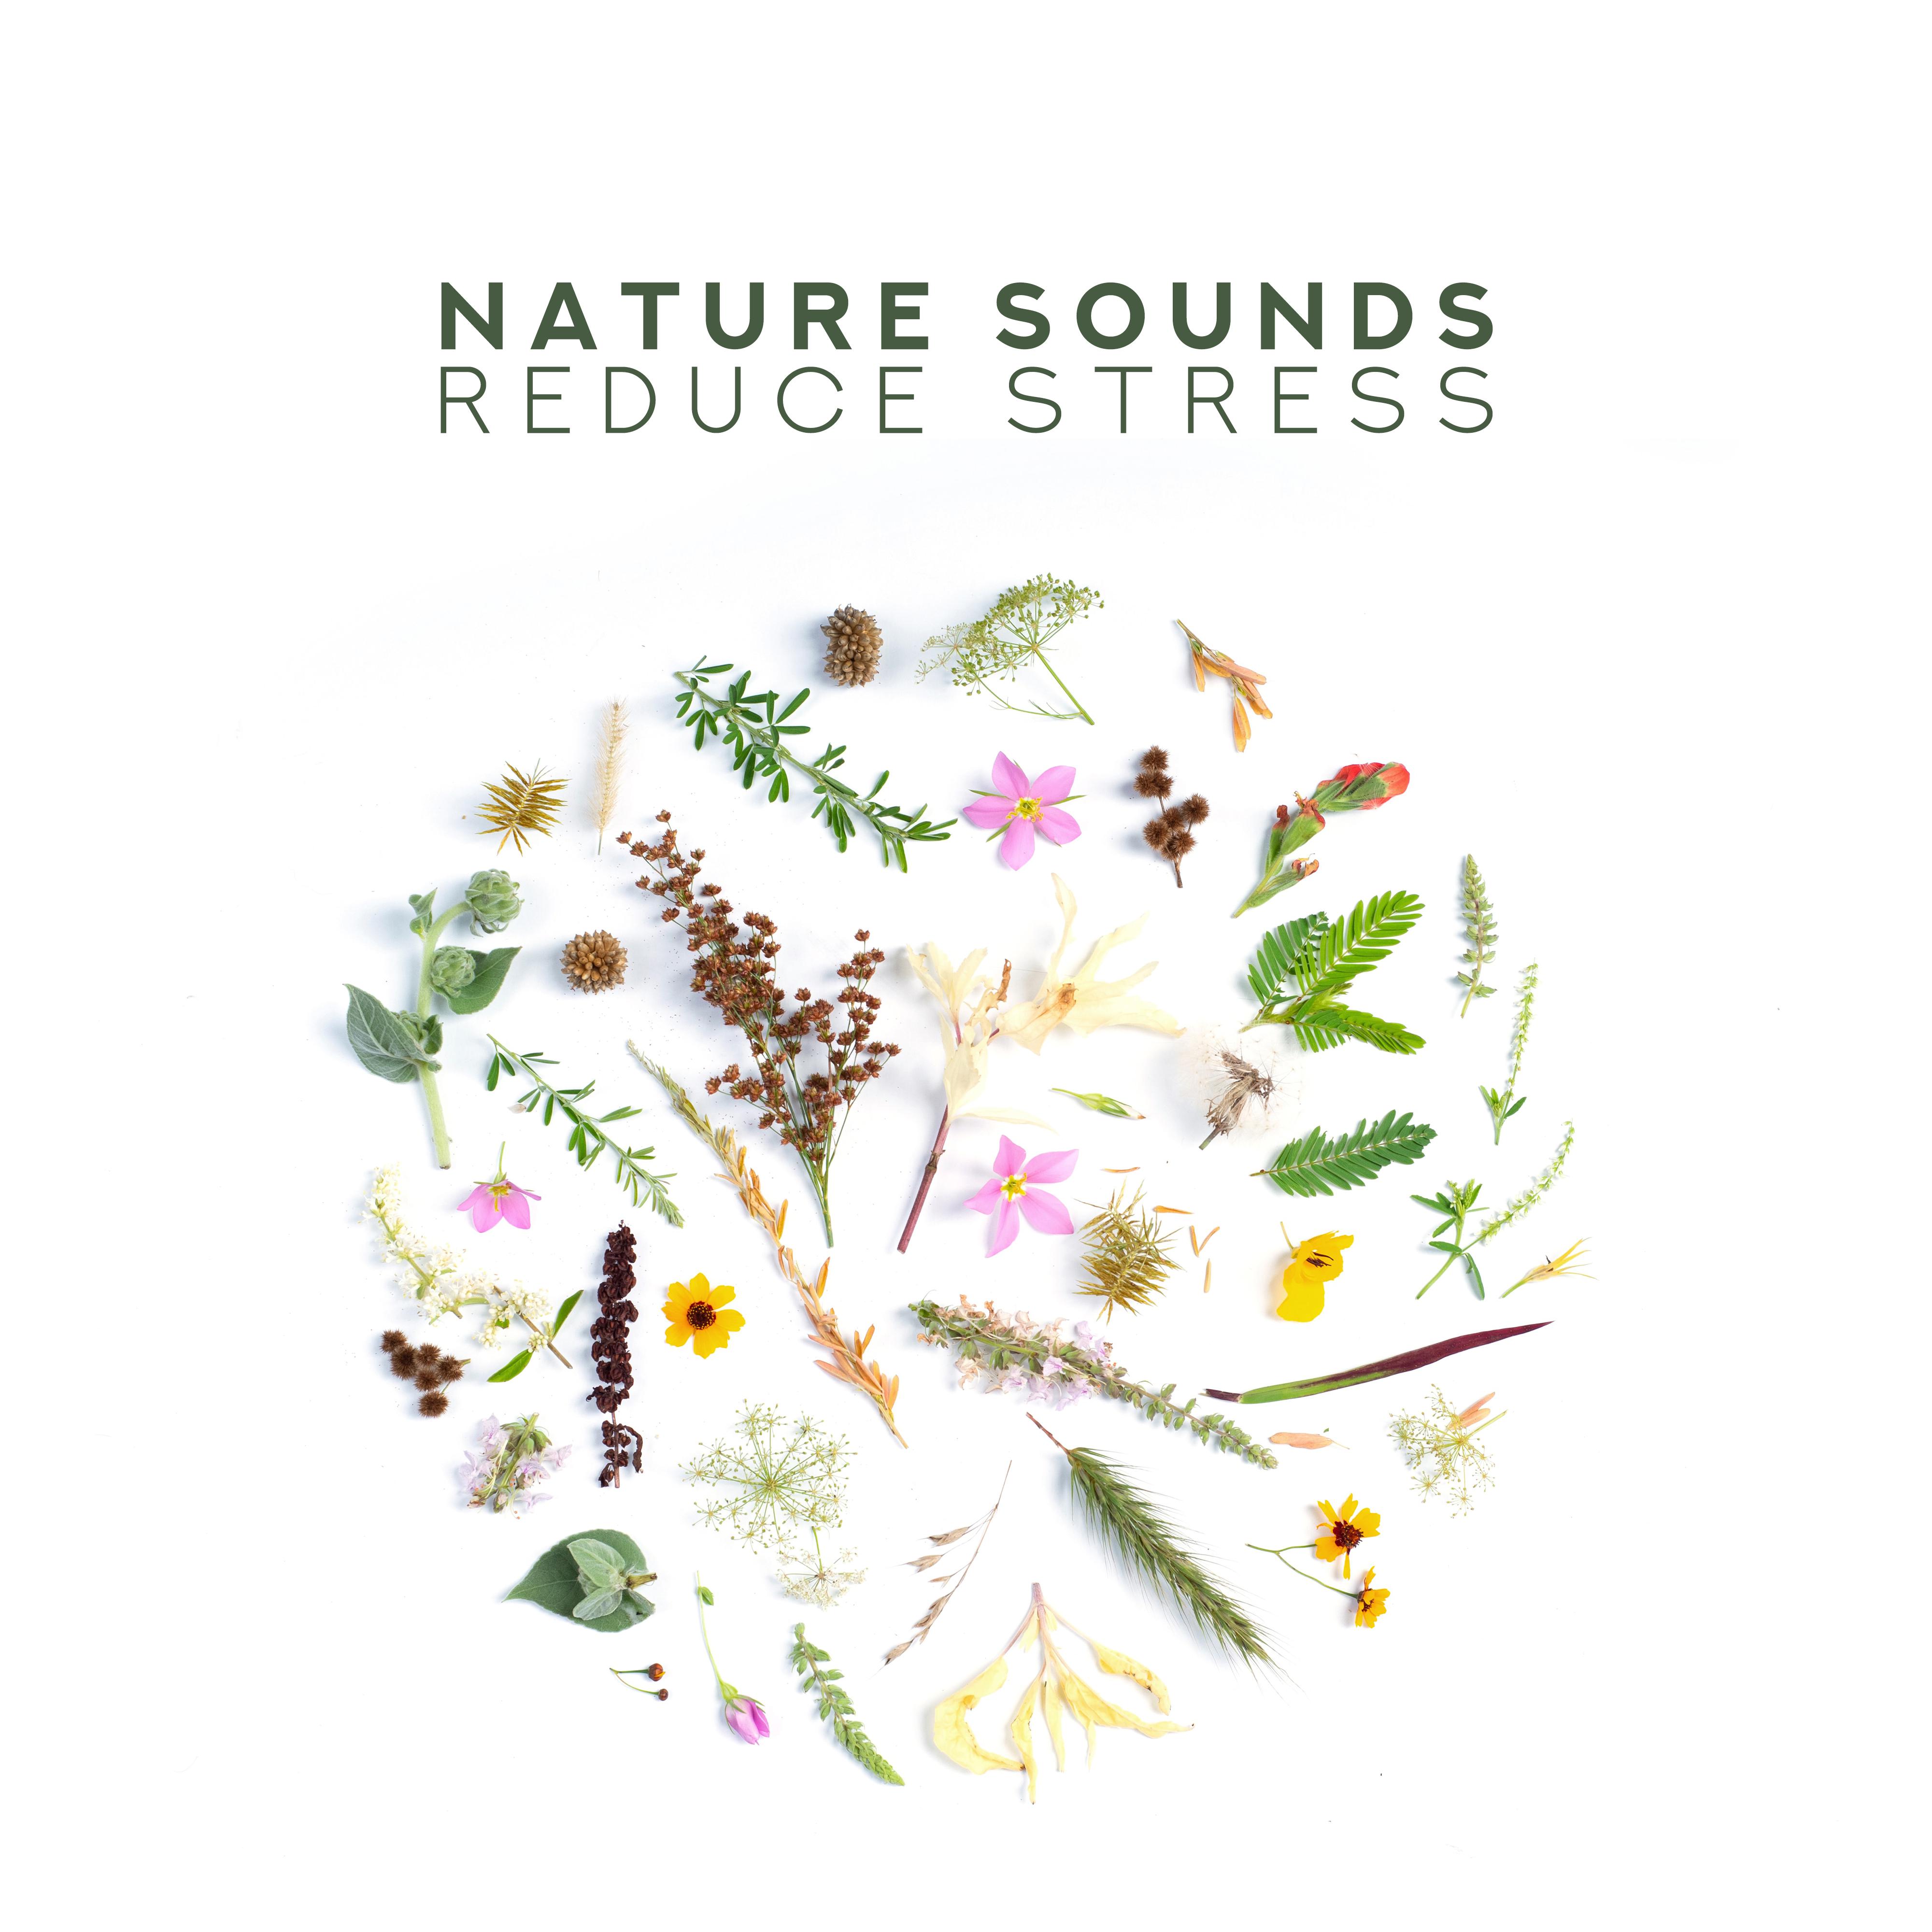 Nature Sounds Reduce Stress: 15 Relaxing Sounds, Deep Harmony, Perfect Relax Zone, Zen, Lounge, Sounds of Nature to Calm Down